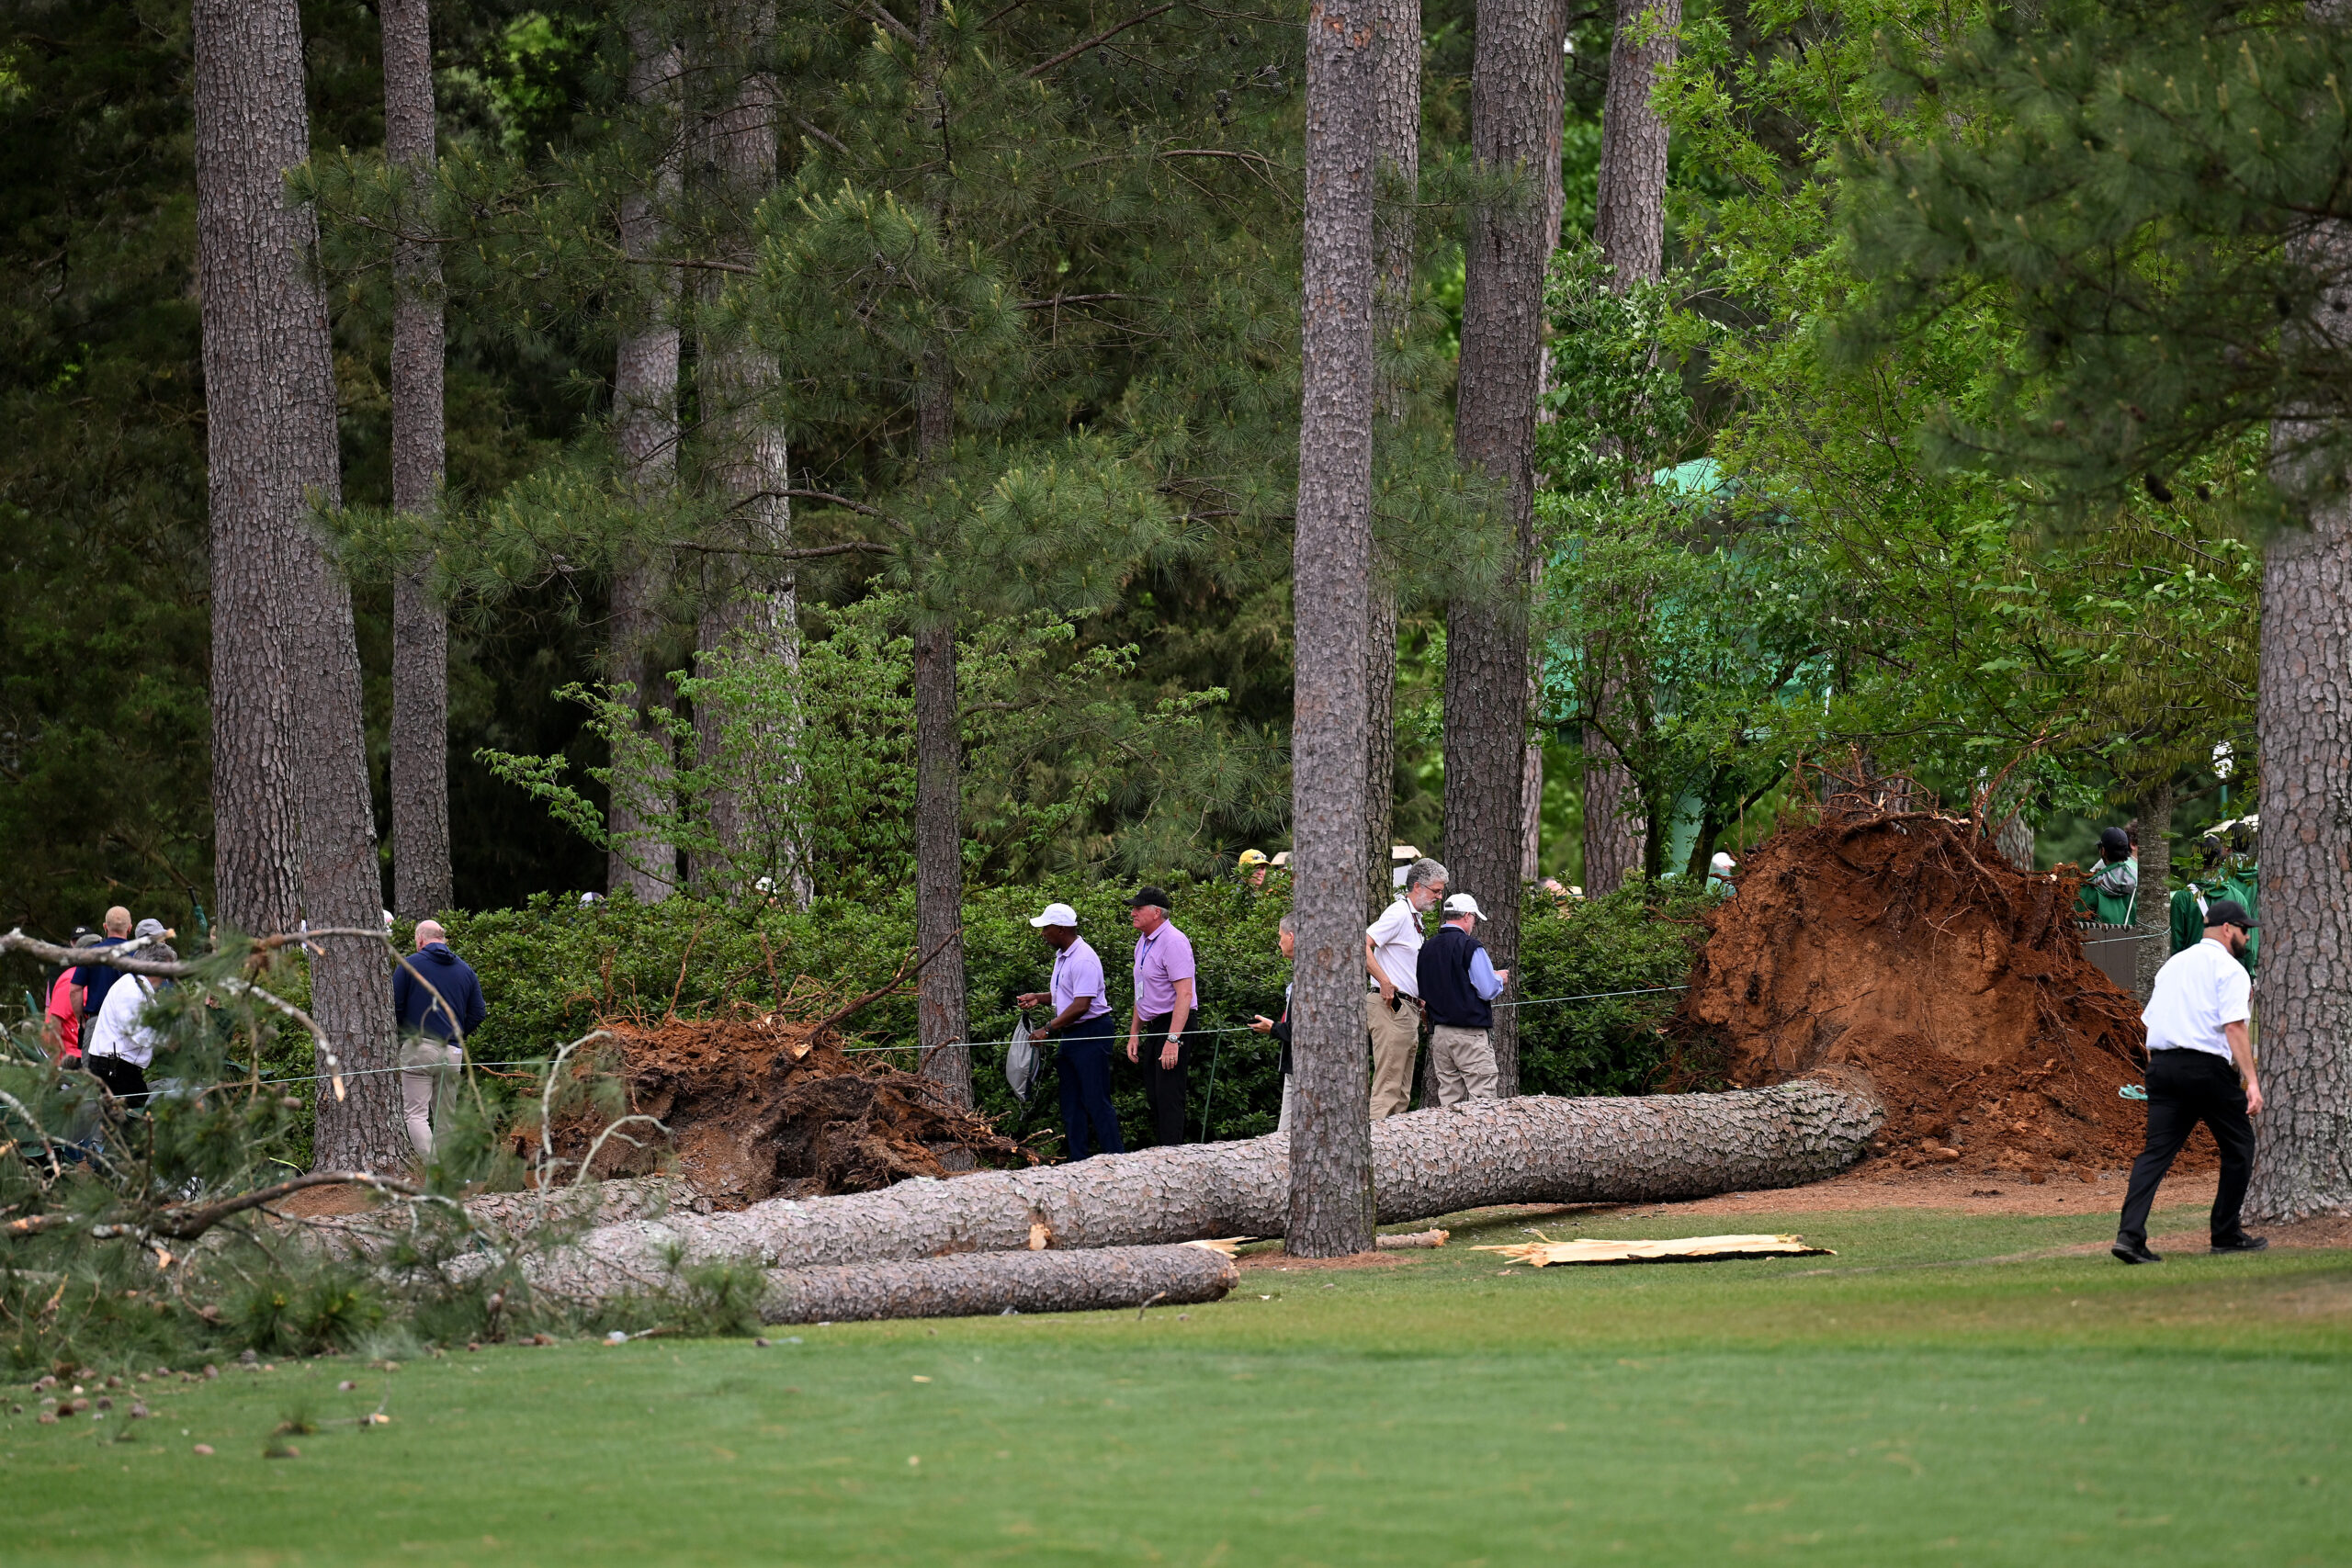 Instant Replay: Masters Play Suspended After Two Trees Fall, Nearly Hits Crowd